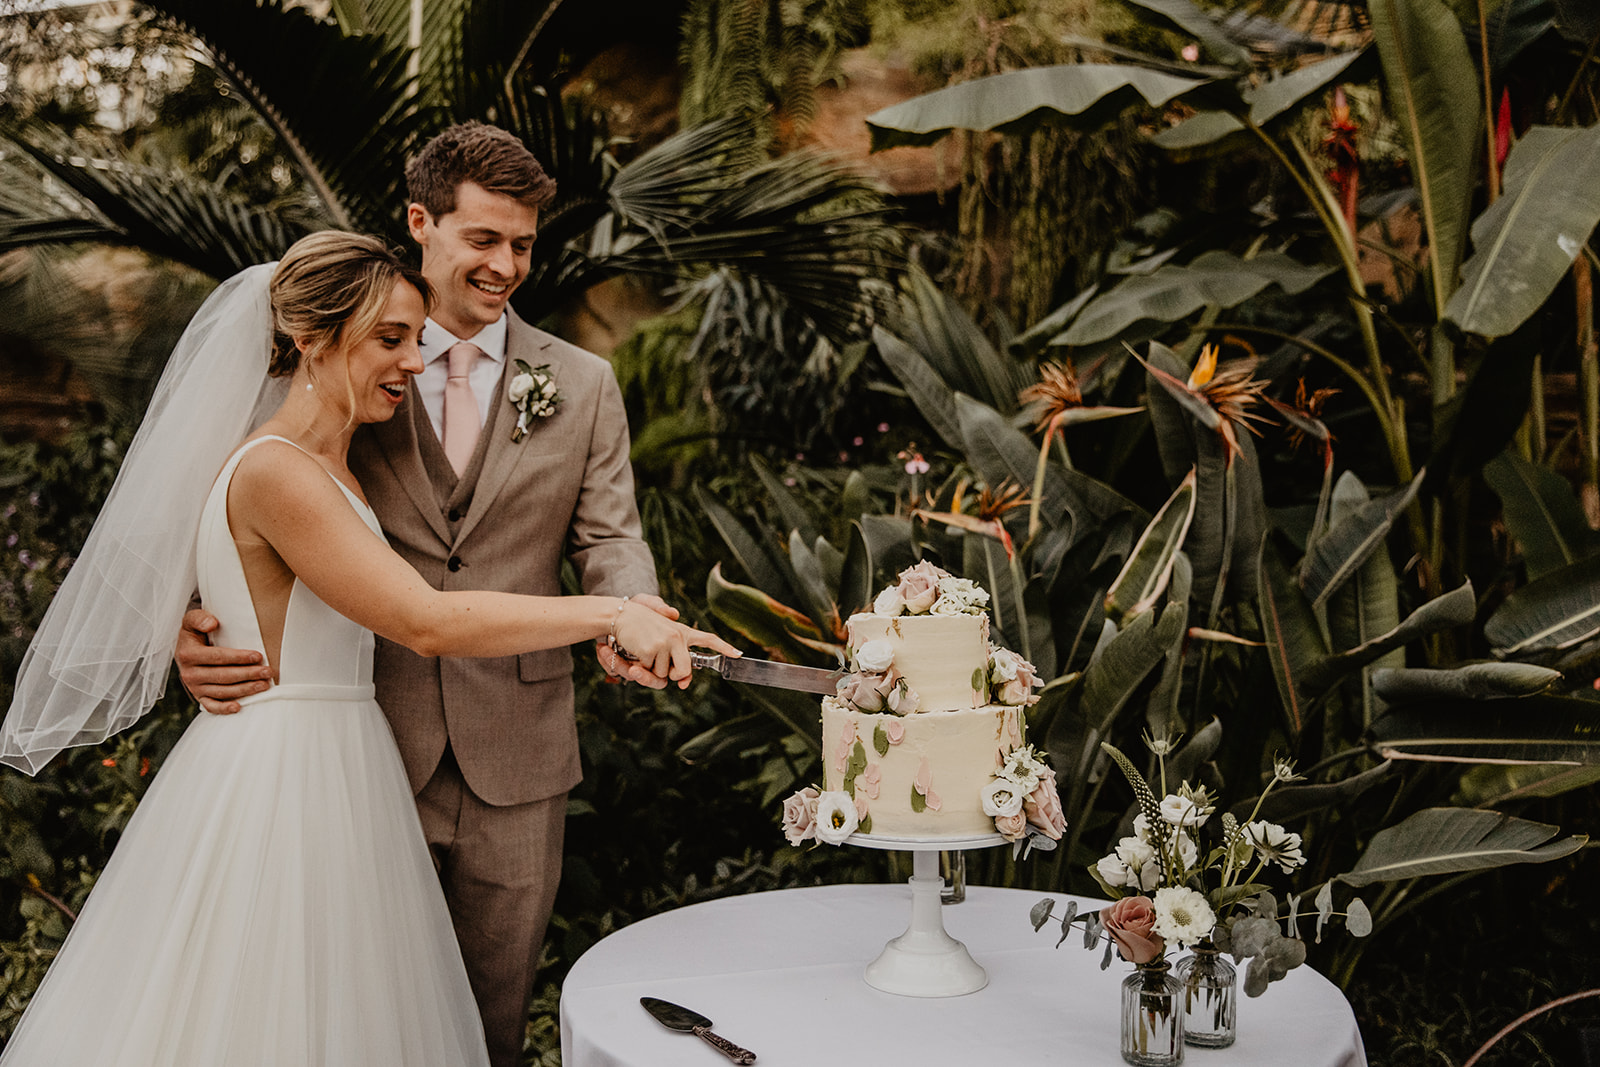 Bride and groom cutting the cake at a RHS Gardens Wisley Wedding. By Olive Joy Photography